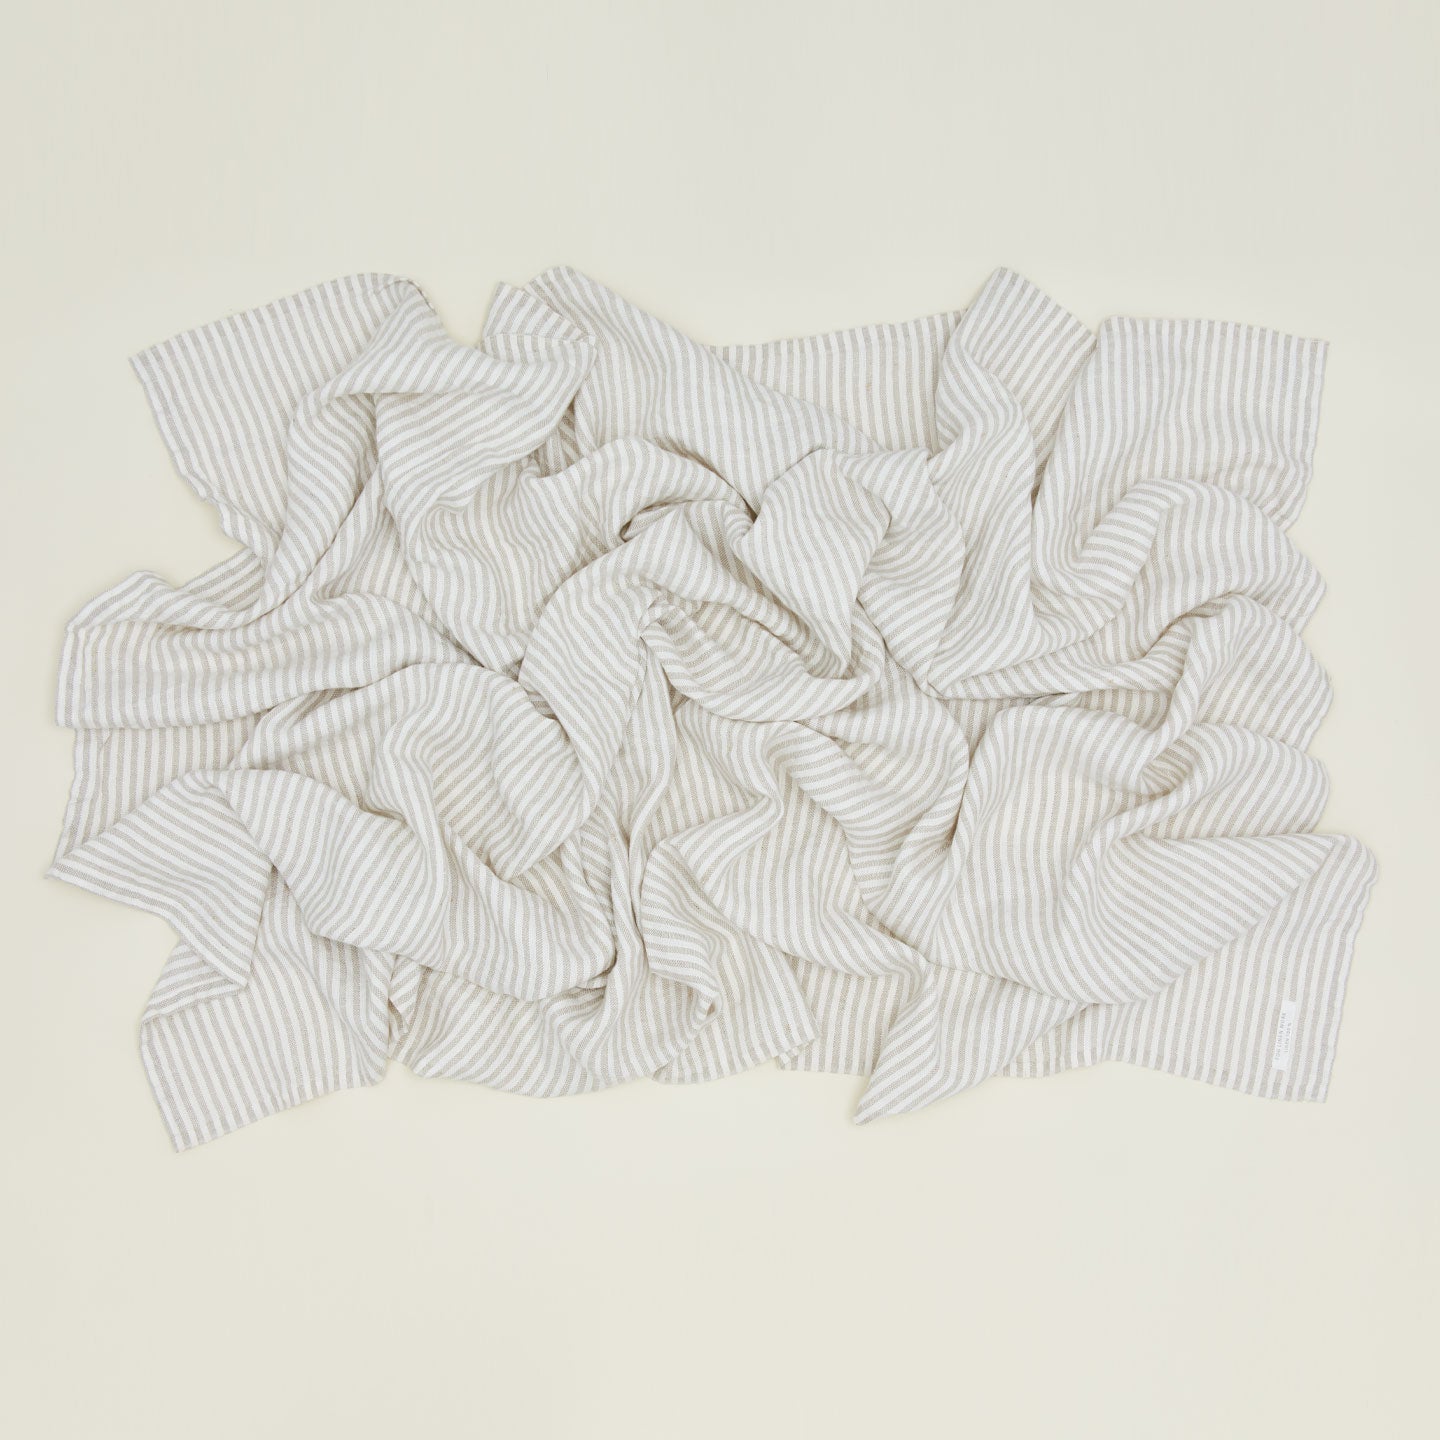 An overhead of a rumpled chambray linen throw with white stripes.